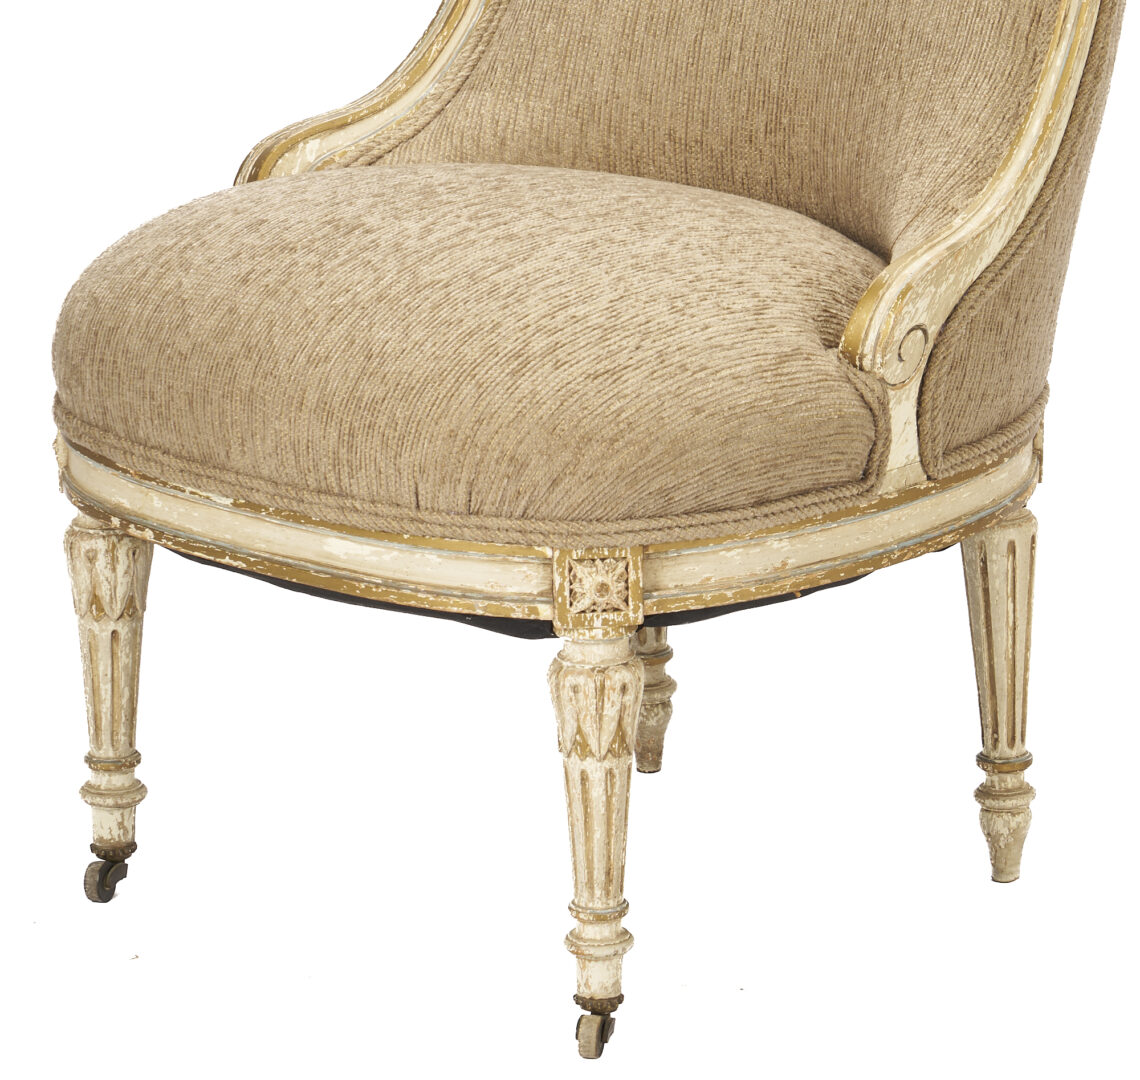 Lot 370: Pr. Of French Belle Epoque Upholstered Chairs